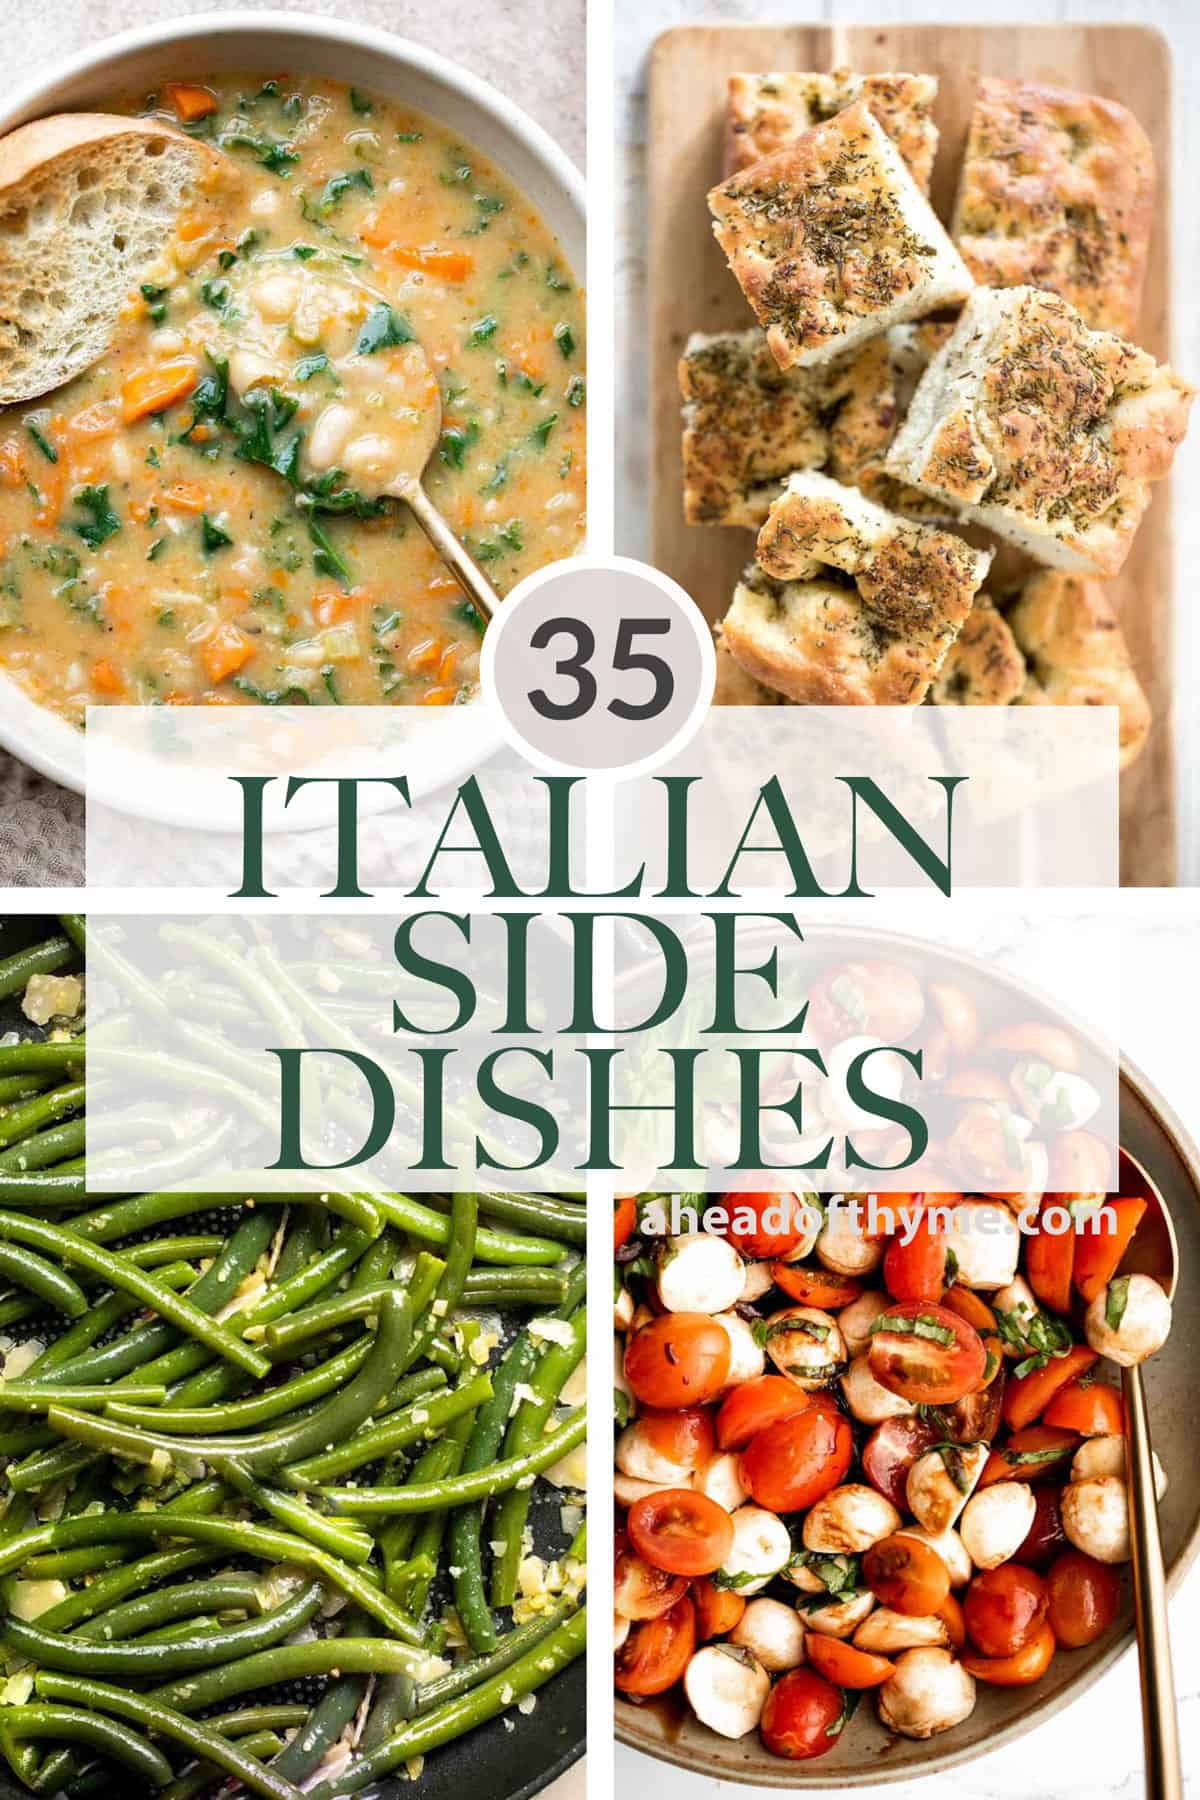 Over 35 Best Italian Side Dishes to pair with your Italian dinner including fresh salads, crispy bread, soups, roasted vegetables, and more. | aheadofthyme.com